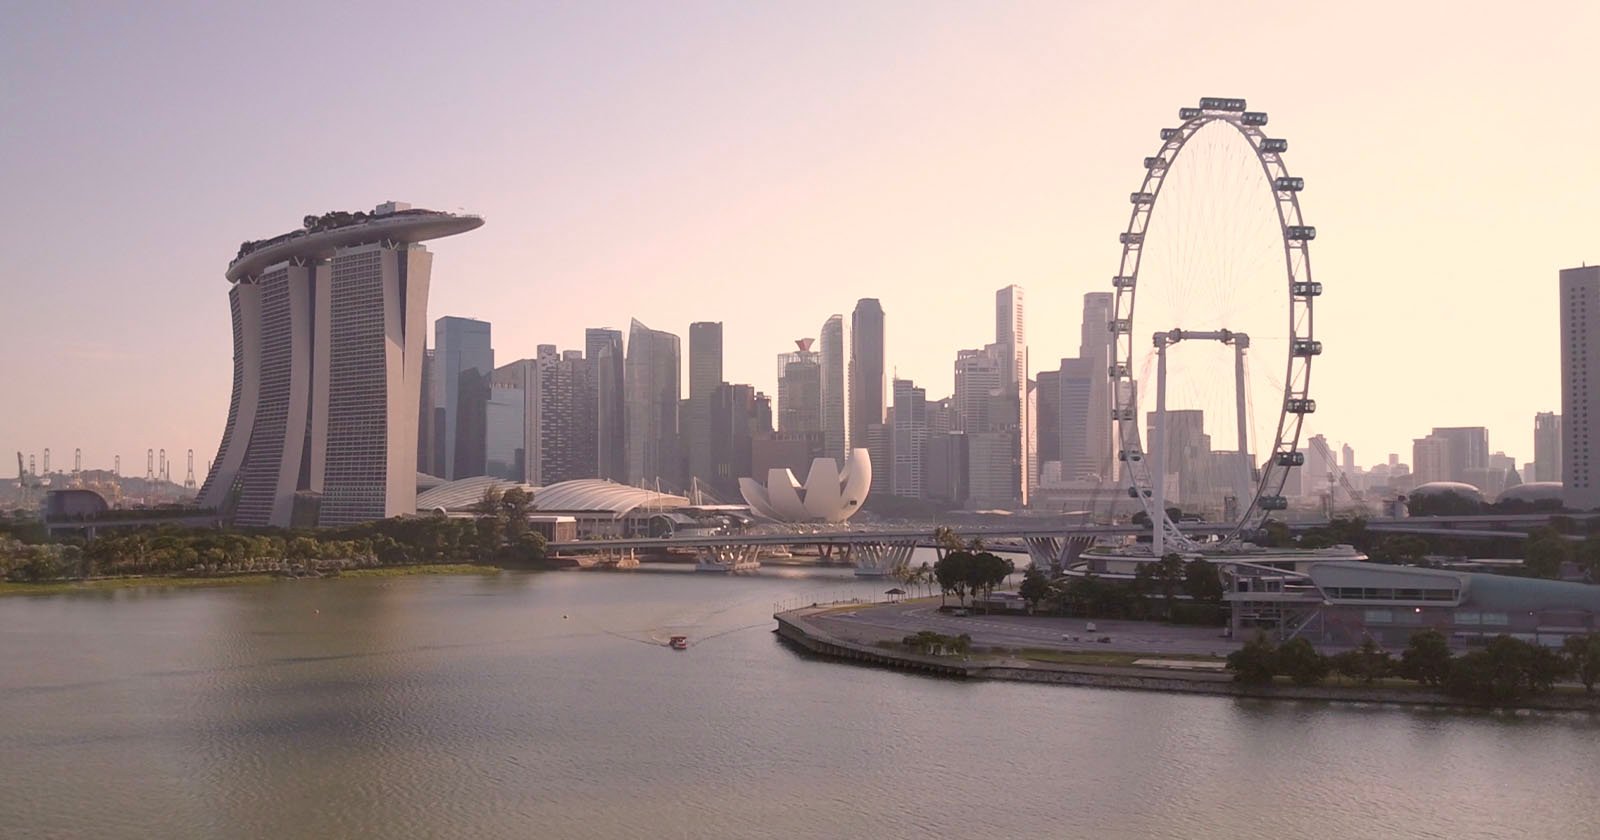 Amazing Timelapse Made From 3.5M Photos Shot Over the Last Decade